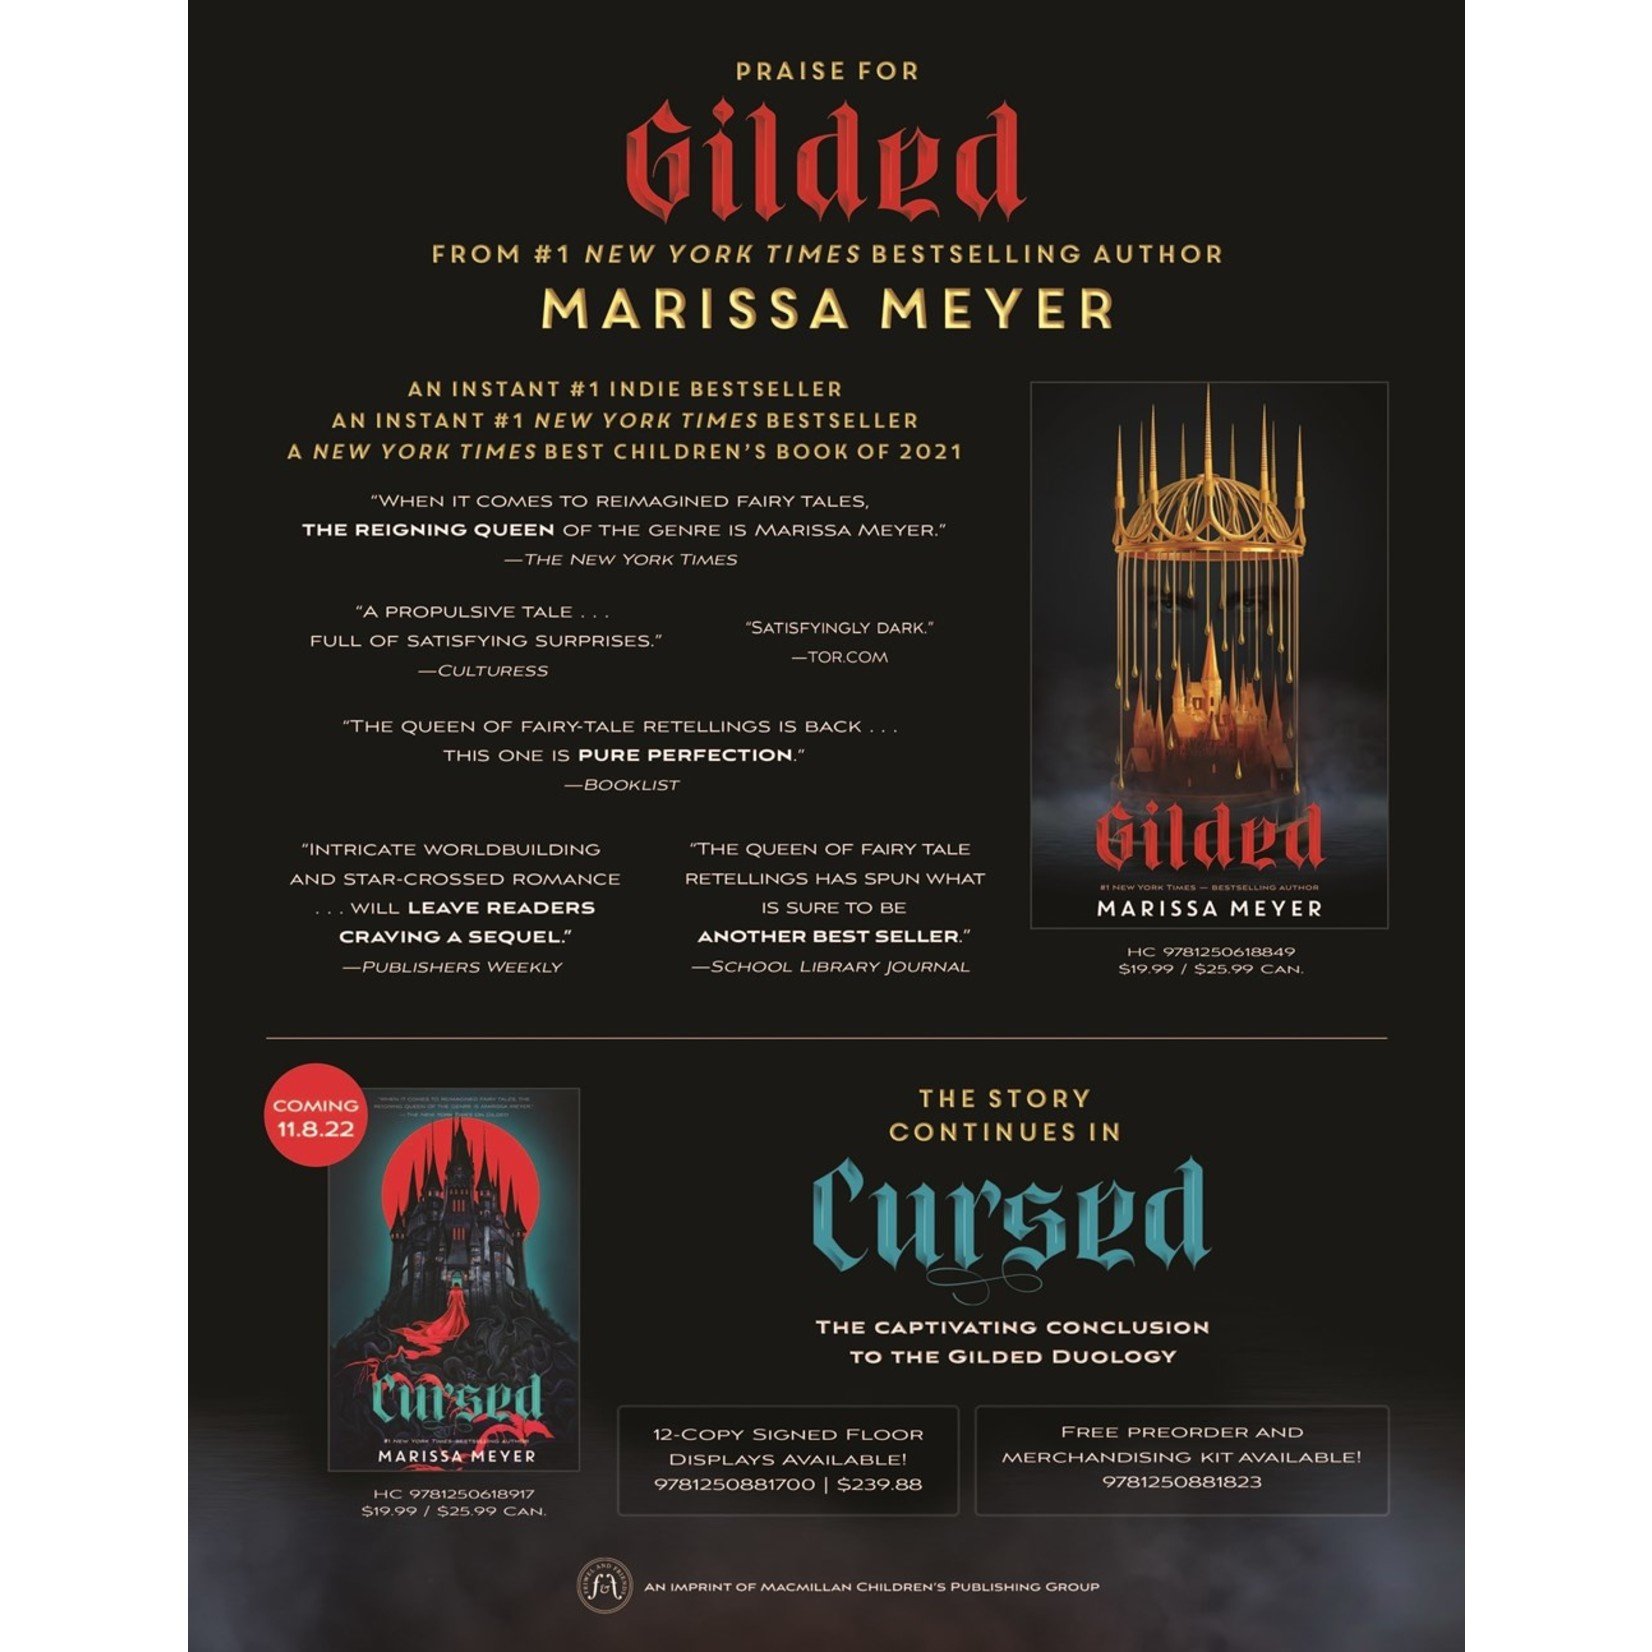 Cursed (Gilded Duology #2)  - SIGNED COPY